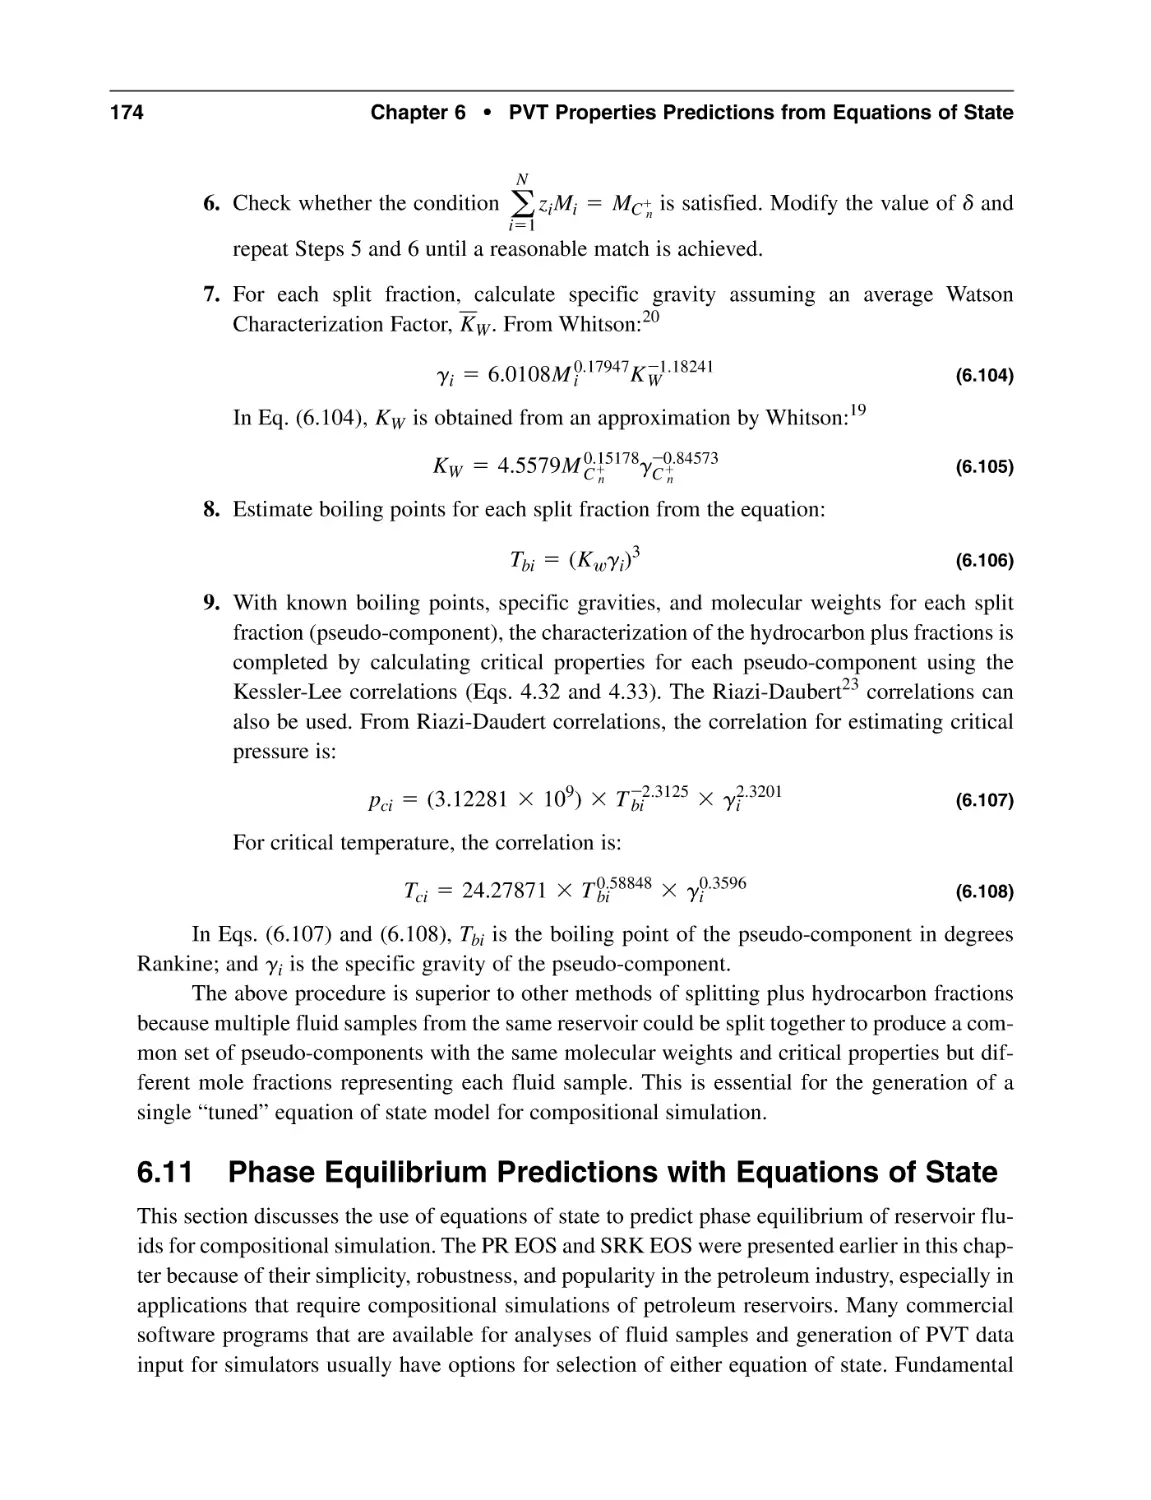 6.11 Phase Equilibrium Predictions with Equations of State